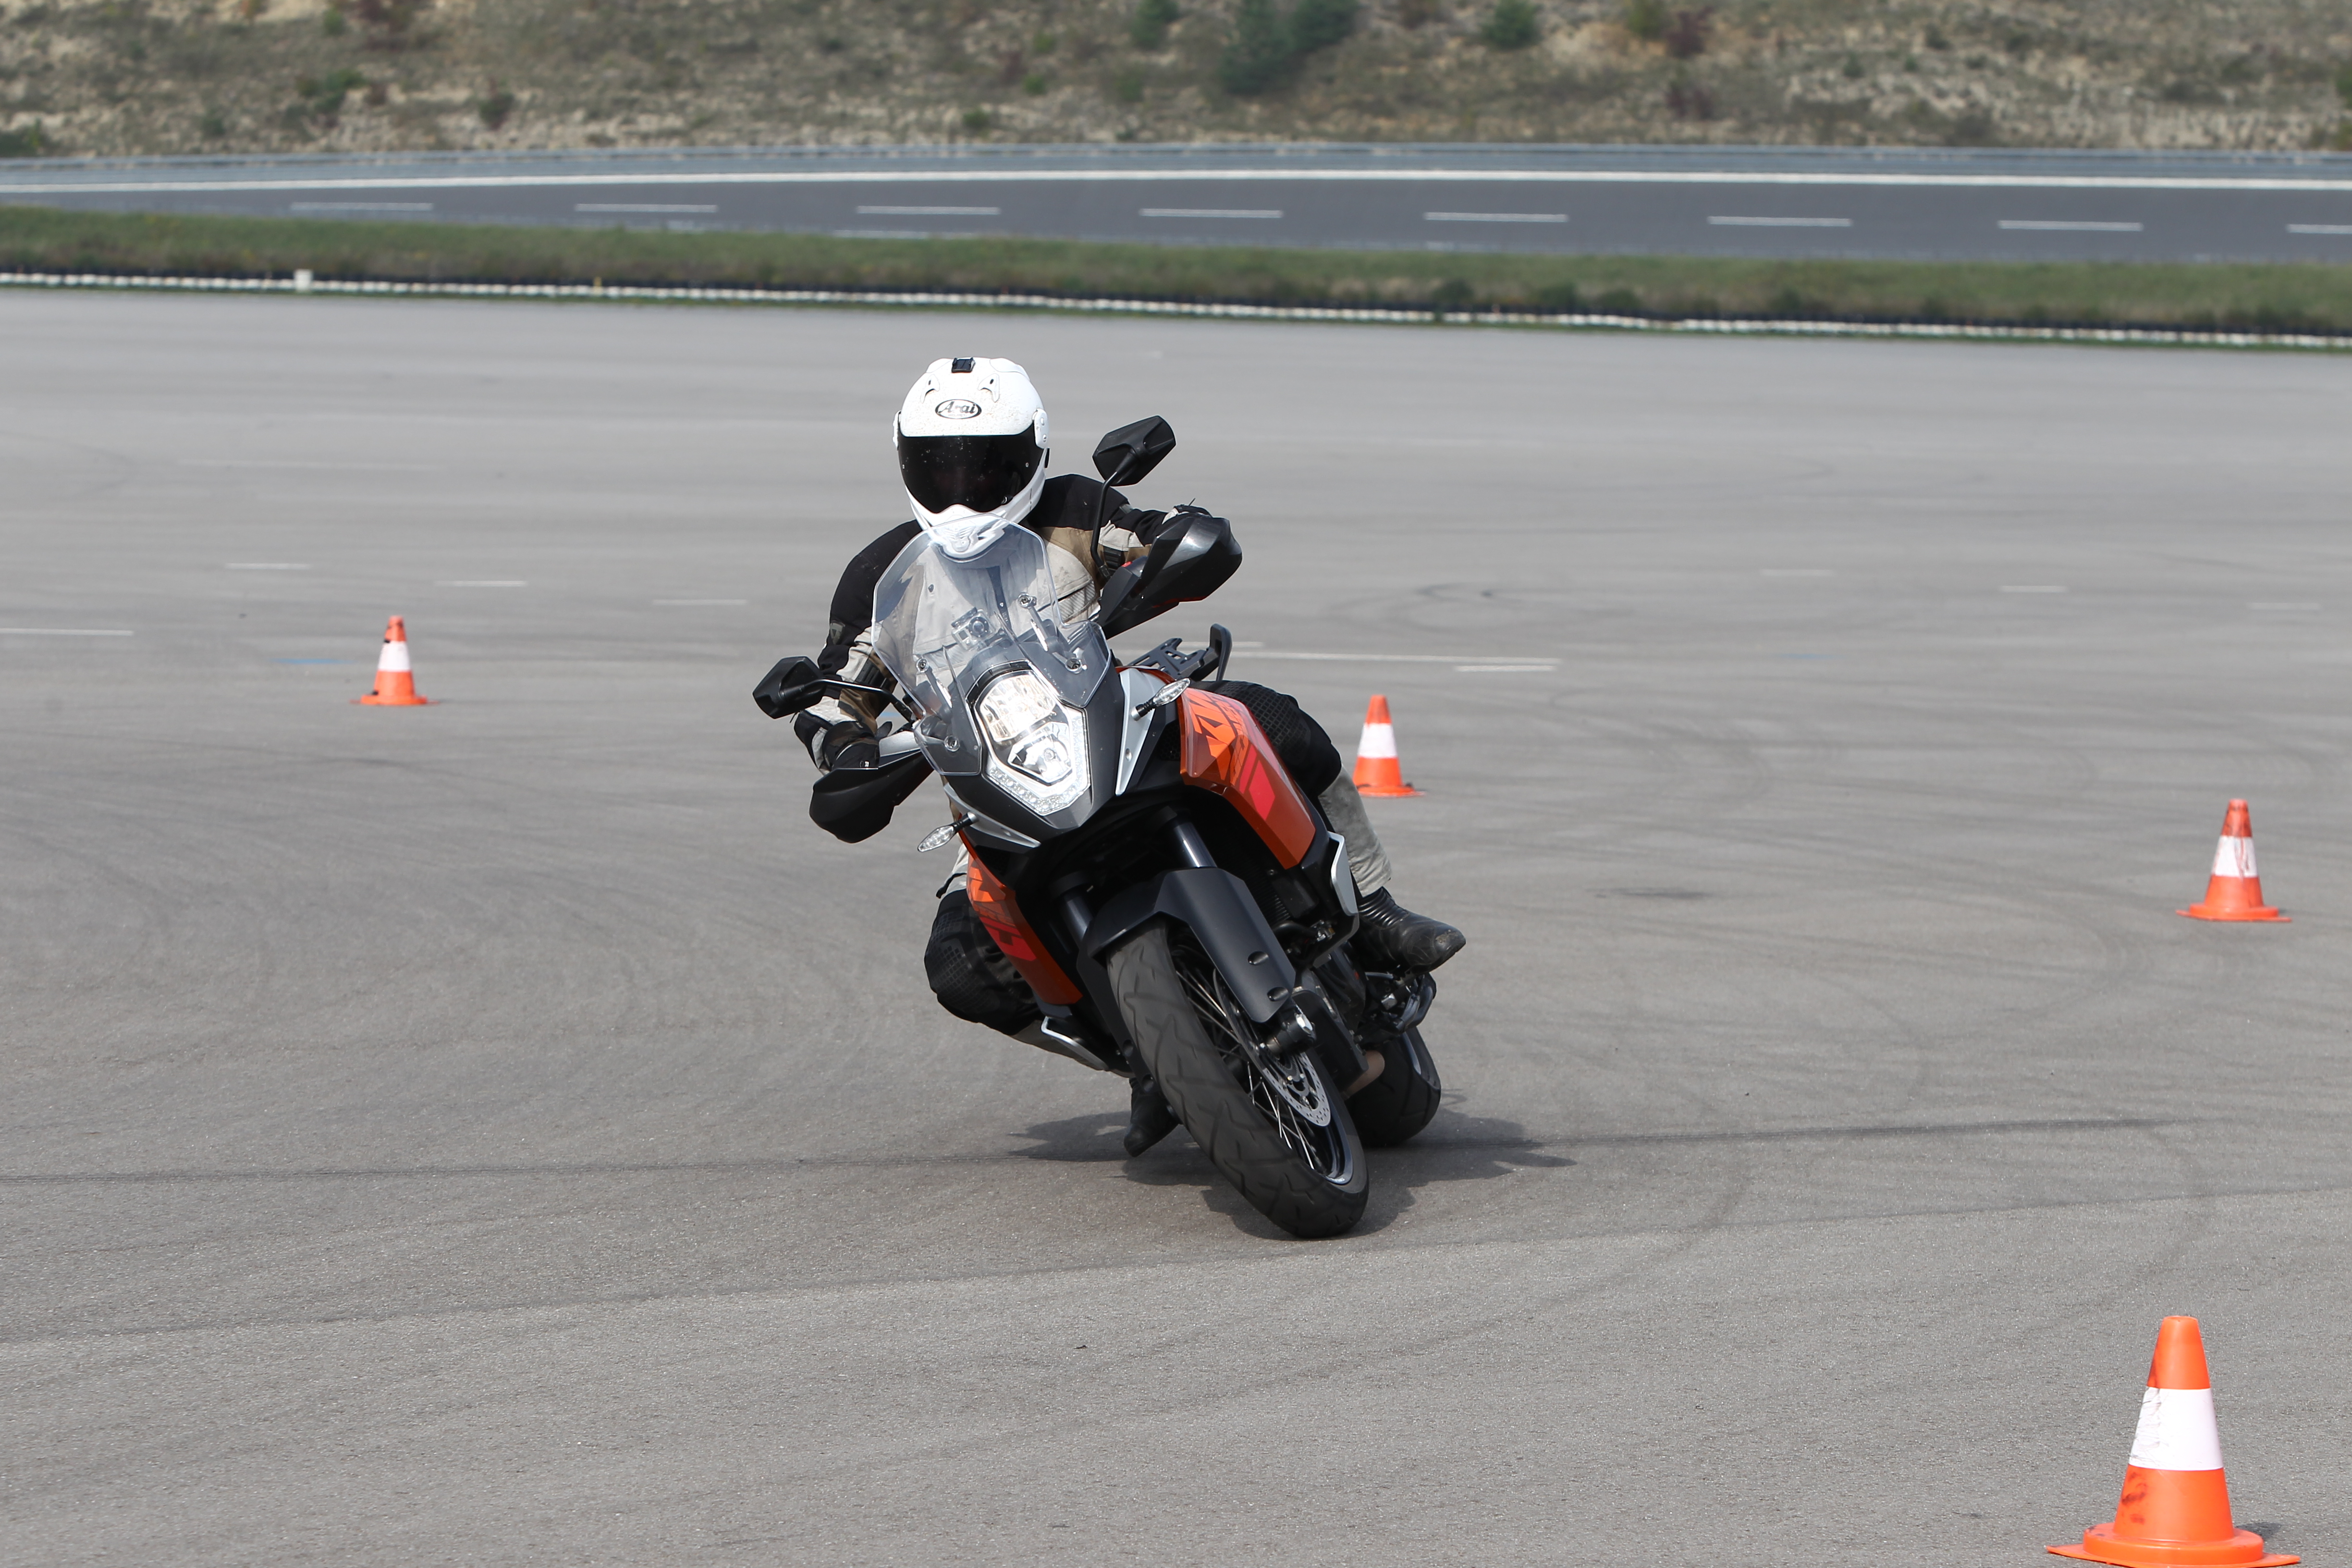 First Ride: KTM 1190 Adventure with cornering ABS